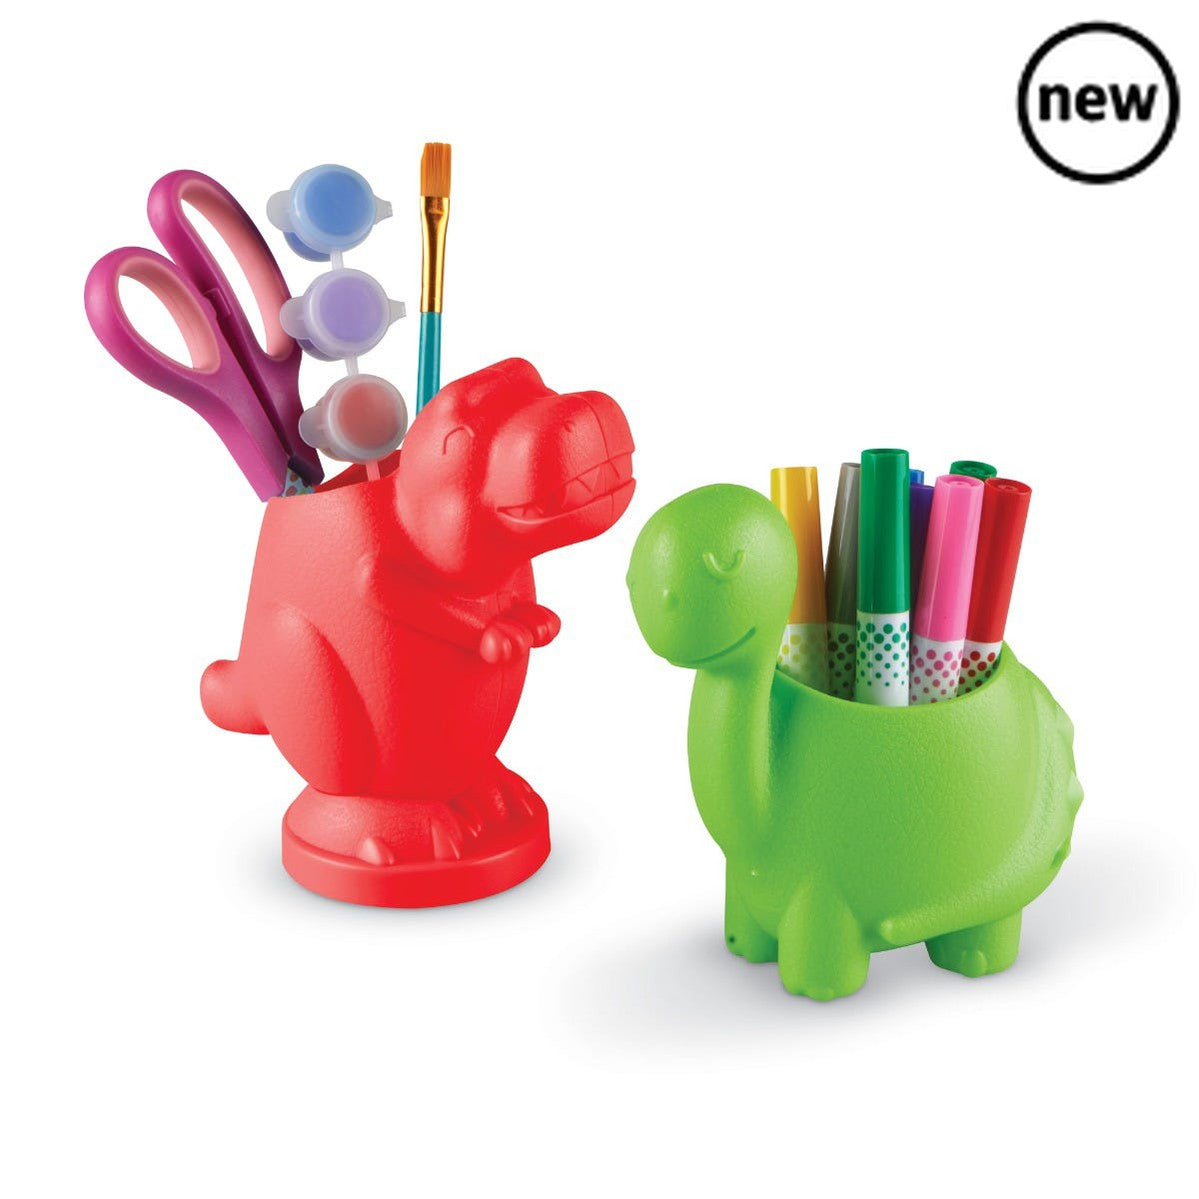 Create-a-Space Kiddy Centre Dinos, Create-a-Space™ Kiddy Centre: Dinos! is the dinosaur storage solution that’s perfect for dino fans to organise pencils, markers, scissors, glue stick, and more. There are 4 removable dinosaur stationery storage cups on the portable base with carrier handle. This means that stationery supplies are always within easy reach. Dinosaur fans will love organising their stationery with this fun Create-a-Space™ desk organiser. Store stationery supplies and move them with ease. This